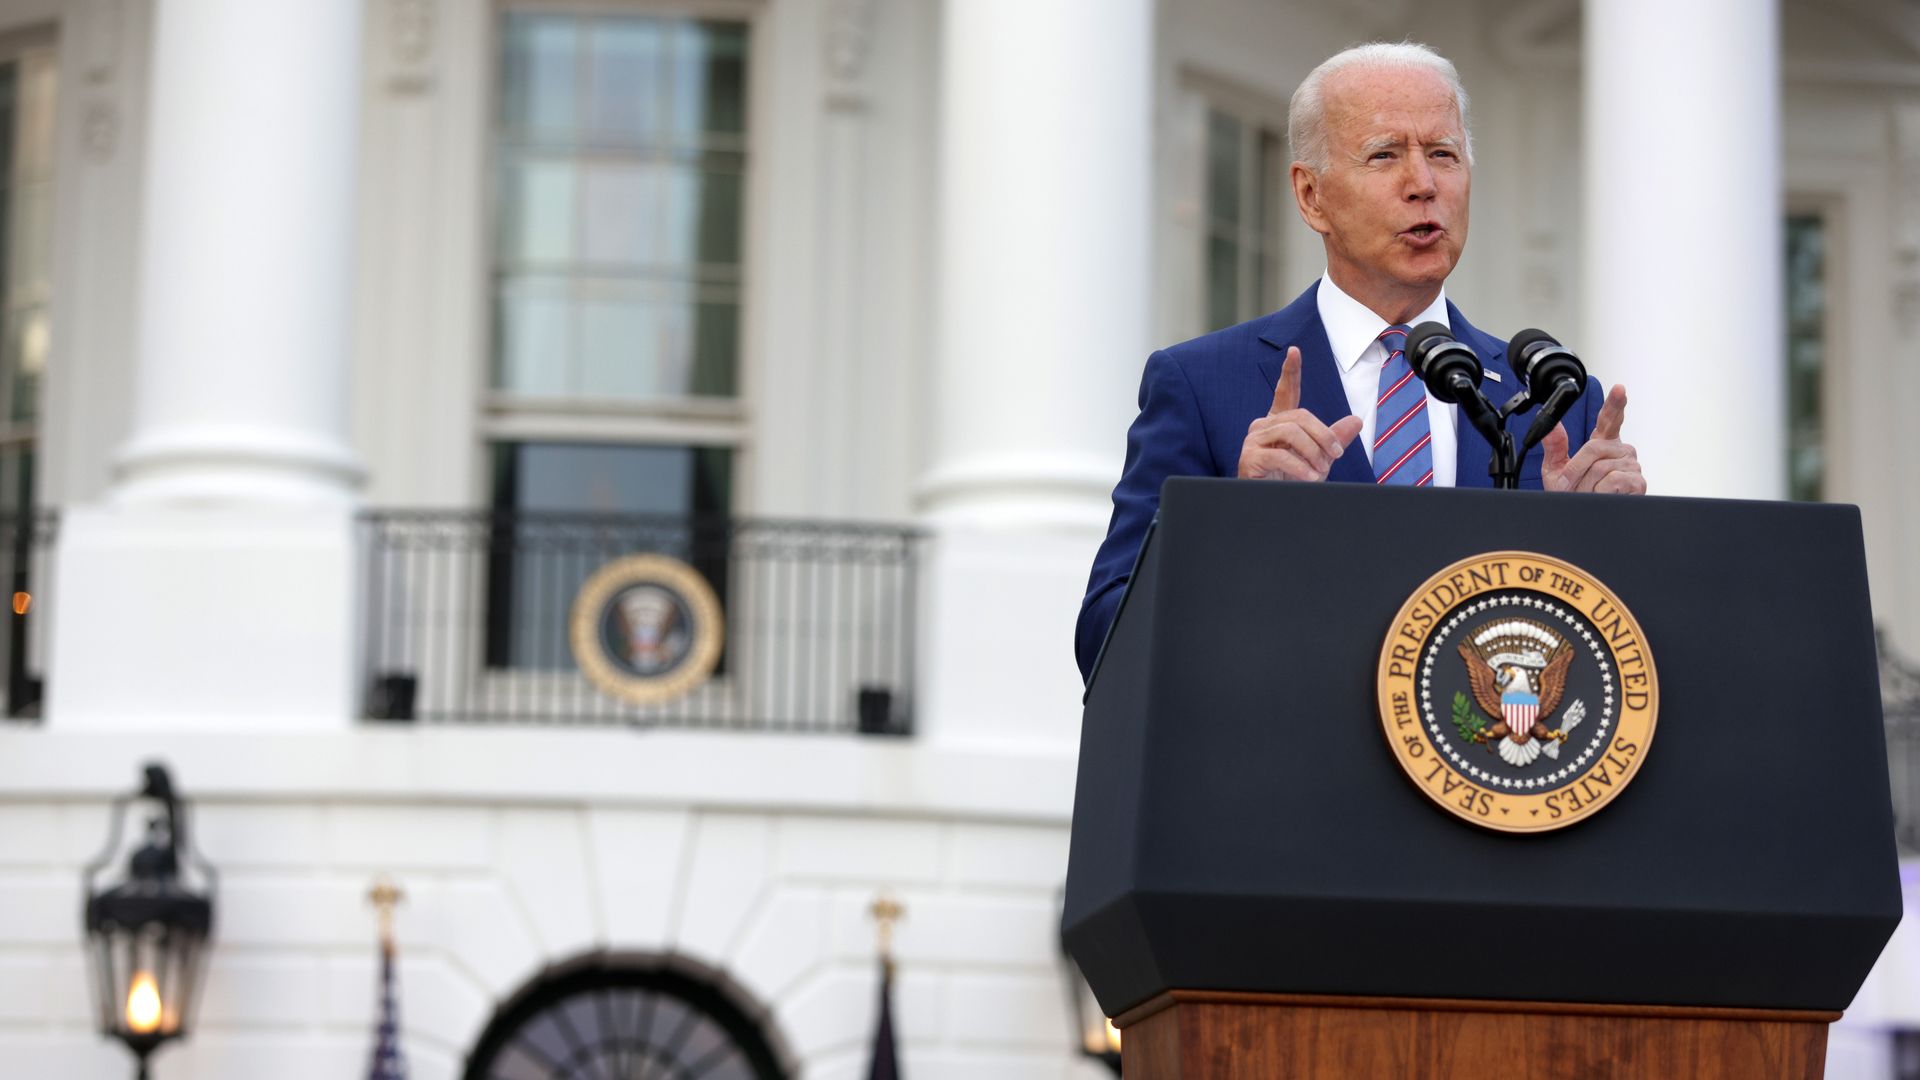 President Joe Biden speaks during a Fourth of July BBQ event to celebrate Independence Day at the South Lawn of the White House July 4, 2021 in Washington, DC.